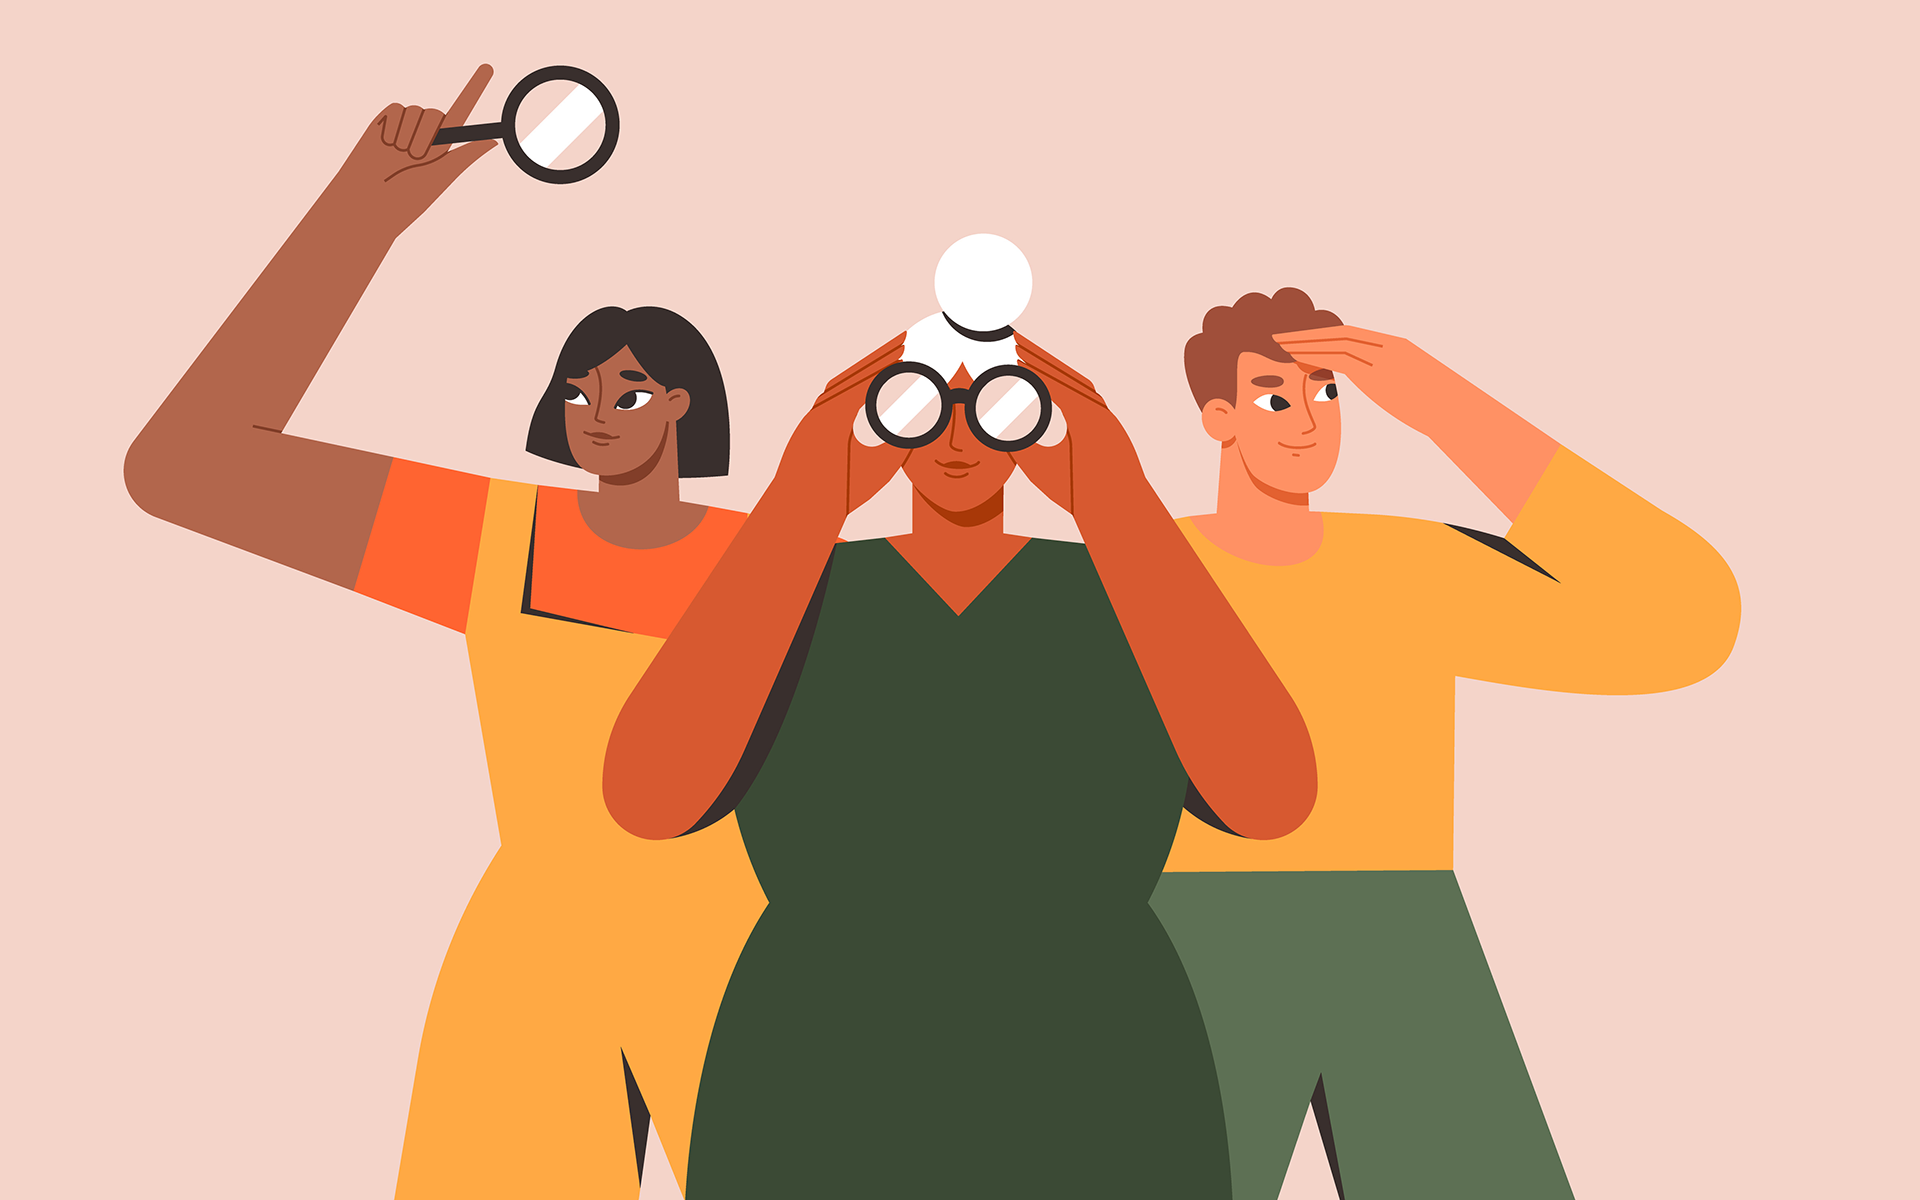 Illustration of three people looking through binoculars and a magnifying glass.